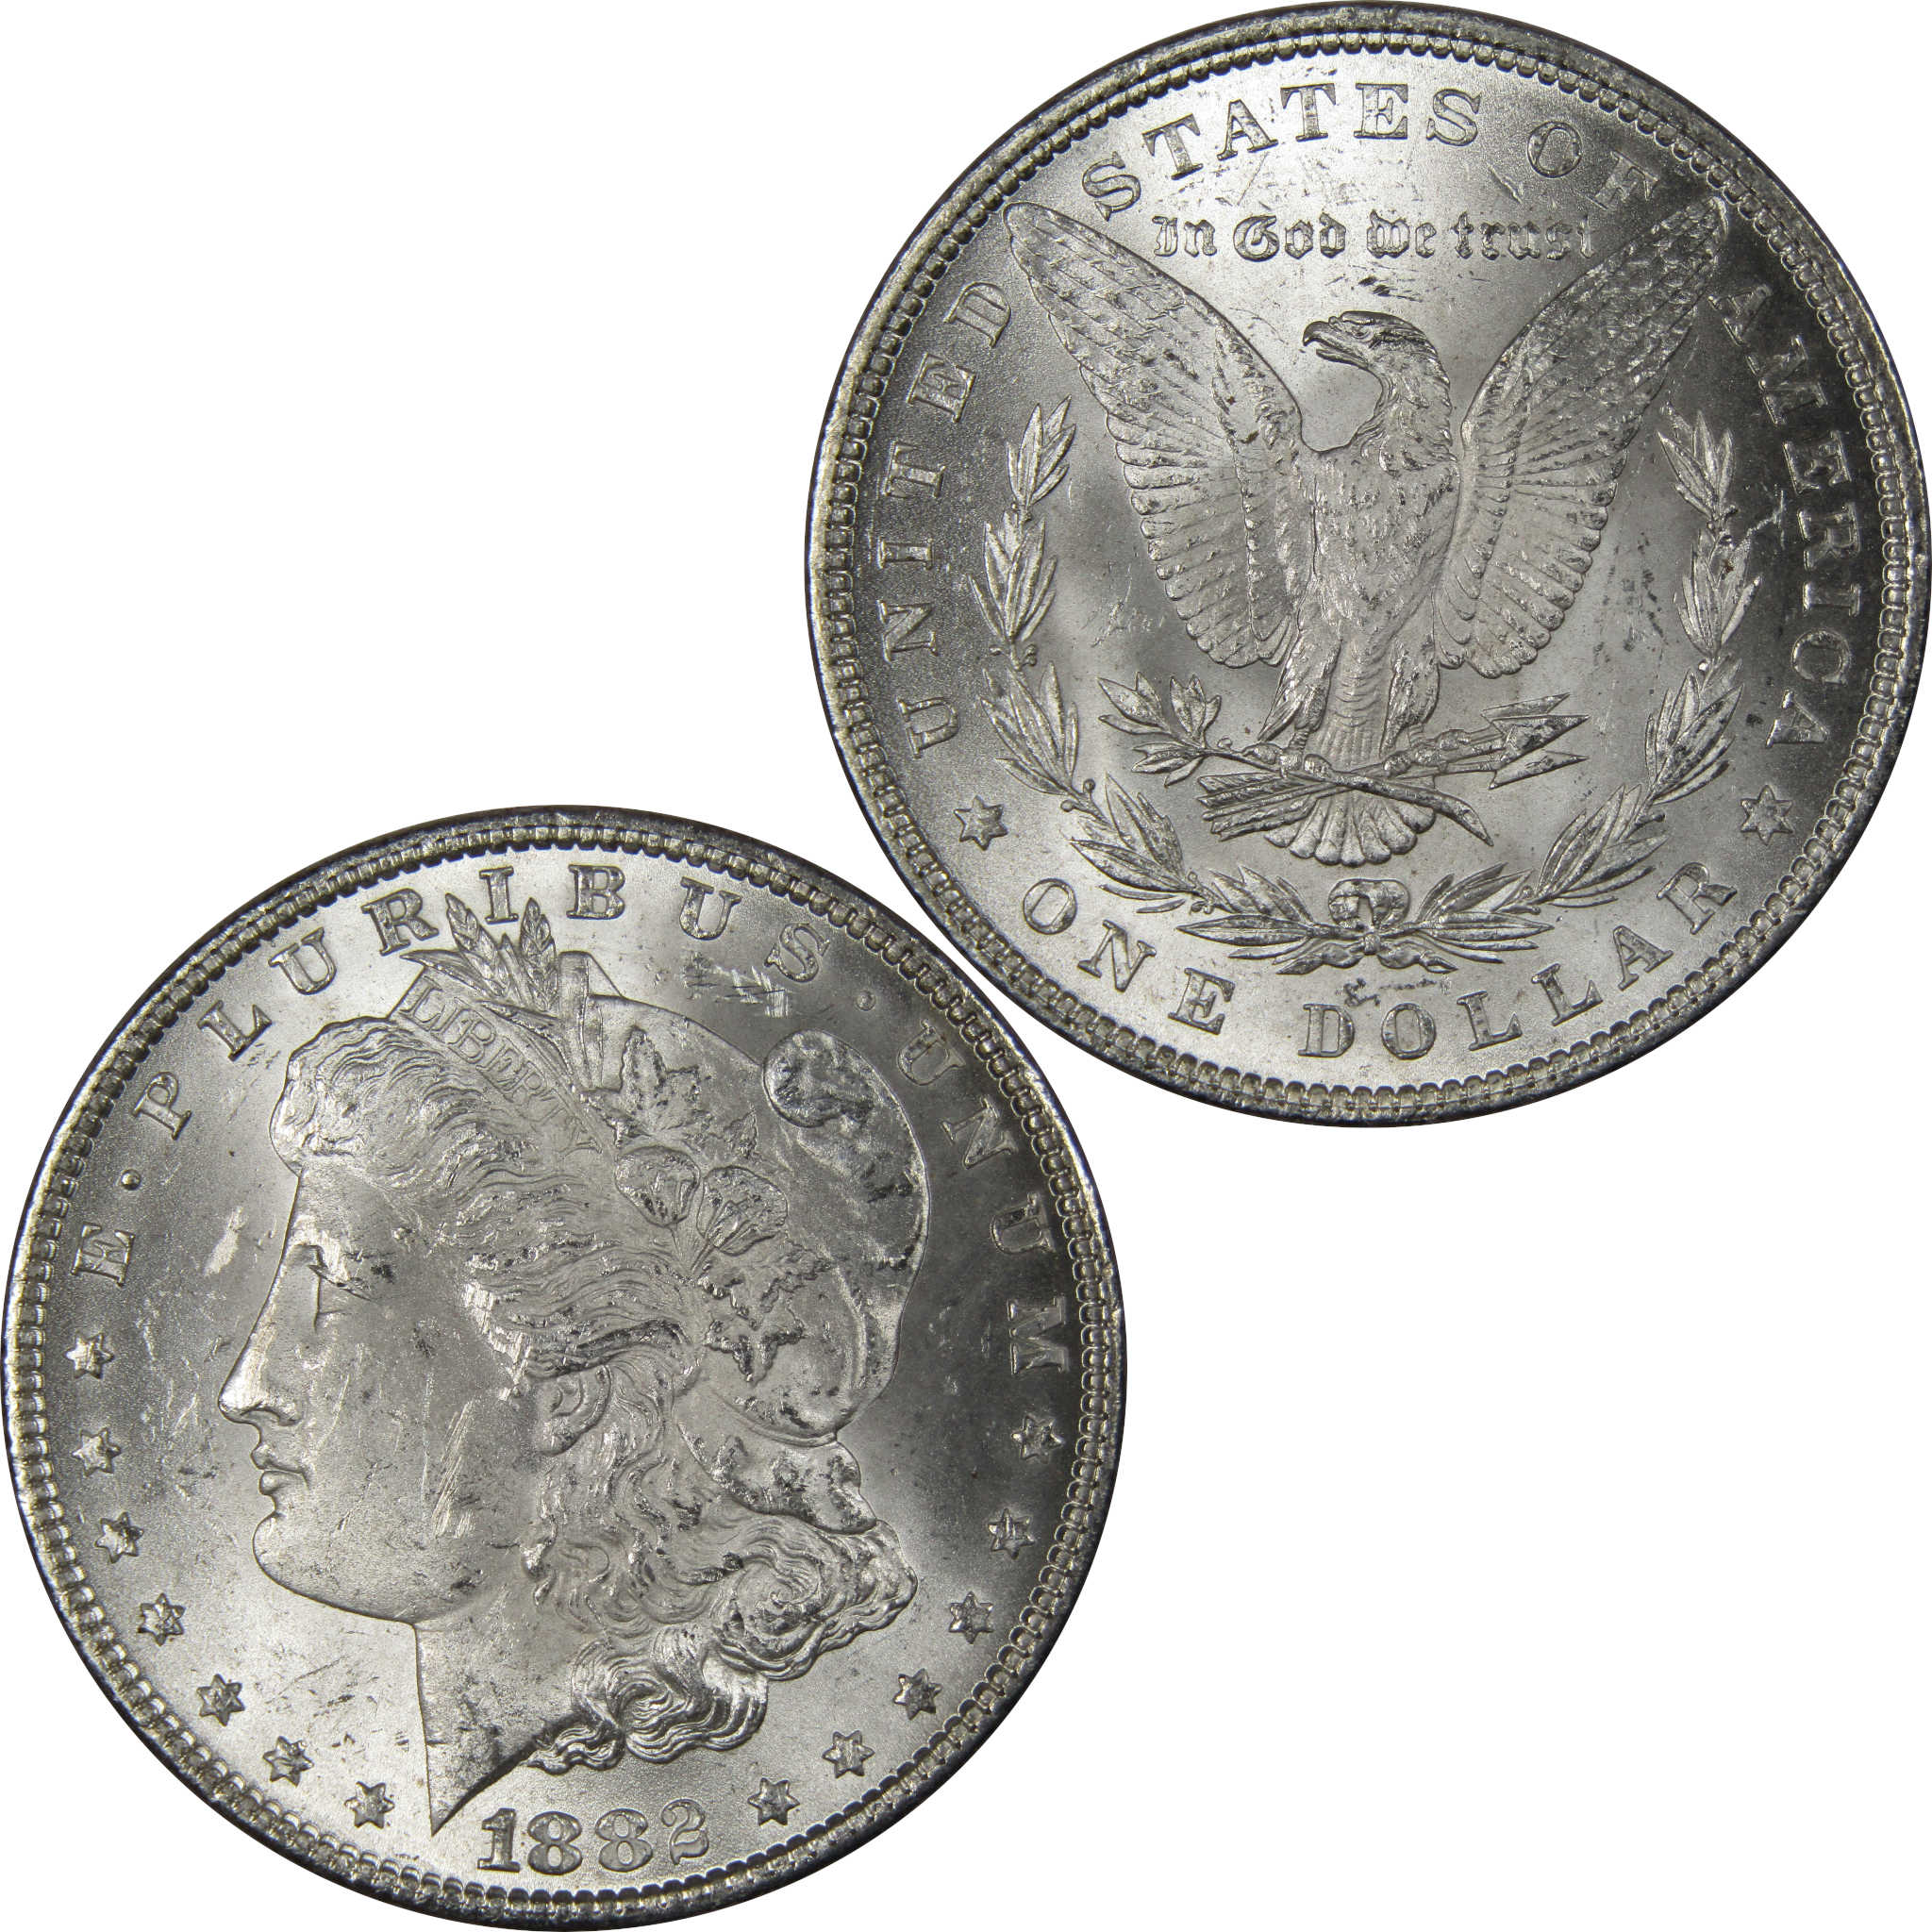 1882 Morgan Dollar BU Uncirculated Mint State 90% Silver SKU:IPC9720 - Morgan coin - Morgan silver dollar - Morgan silver dollar for sale - Profile Coins &amp; Collectibles